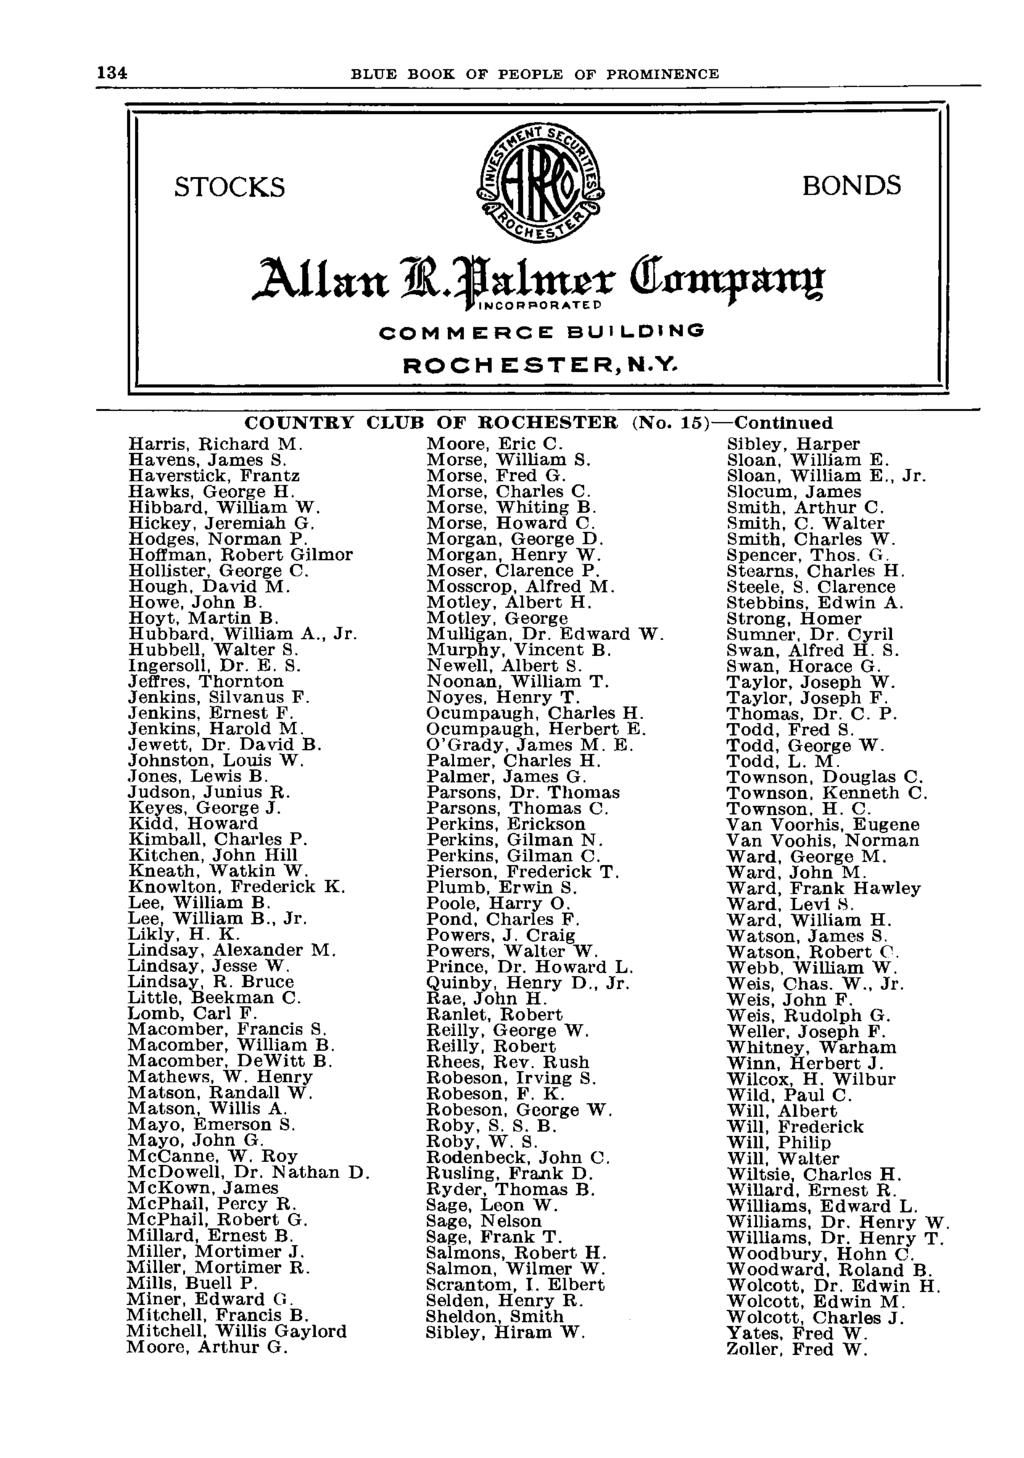 BLUE BOOK OF PEOPLE OF PROMINENCE STOCKS BONDS COUNTRY Harris, Richard M. Havens, James S. Haverstick, Frantz Hawks, George H. Hibbard, William W. Hickey, Jeremiah G. Hodges, Norman P.